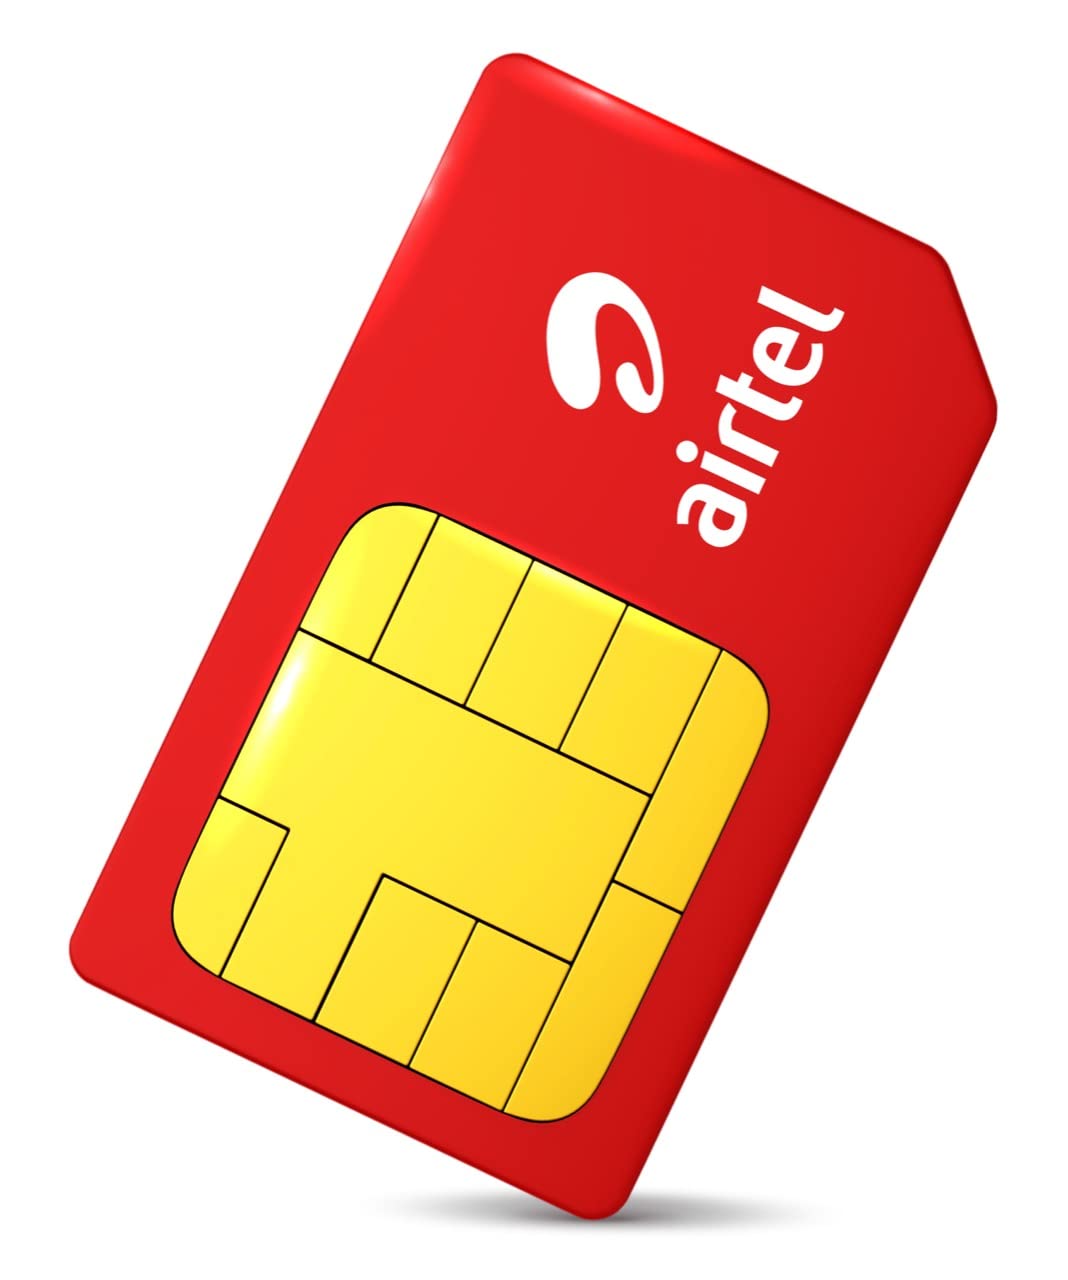 New Airtel Prepaid Sim: Here’s How To Activate Your SIM And Make A Prepaid Recharge Online